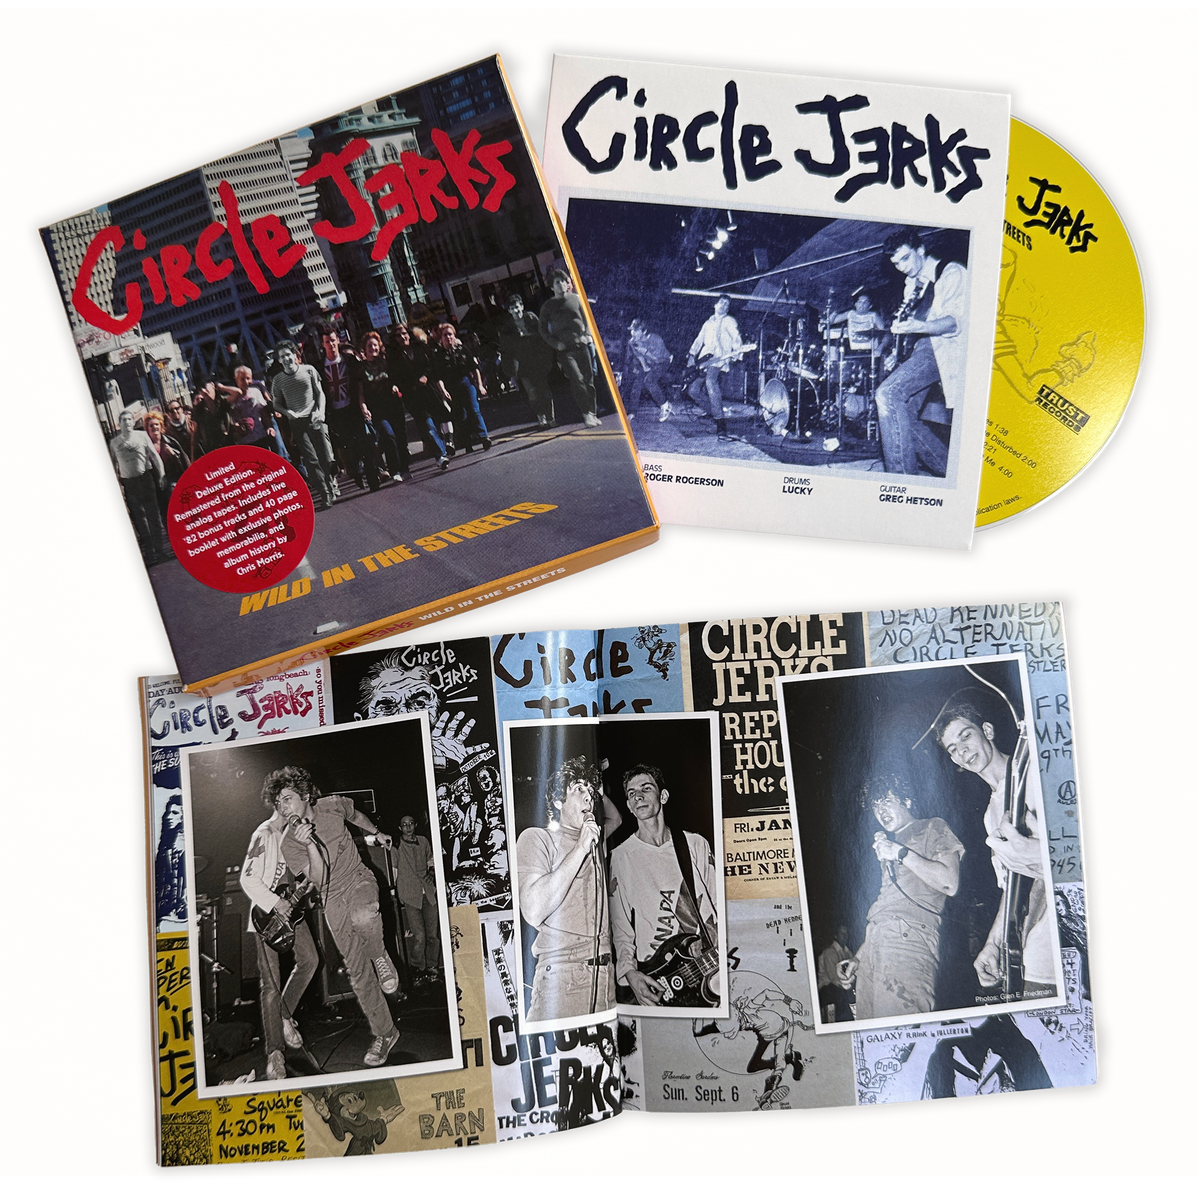 Circle Jerks - Wild in the Streets (Deluxe Anniversary Edition) CD